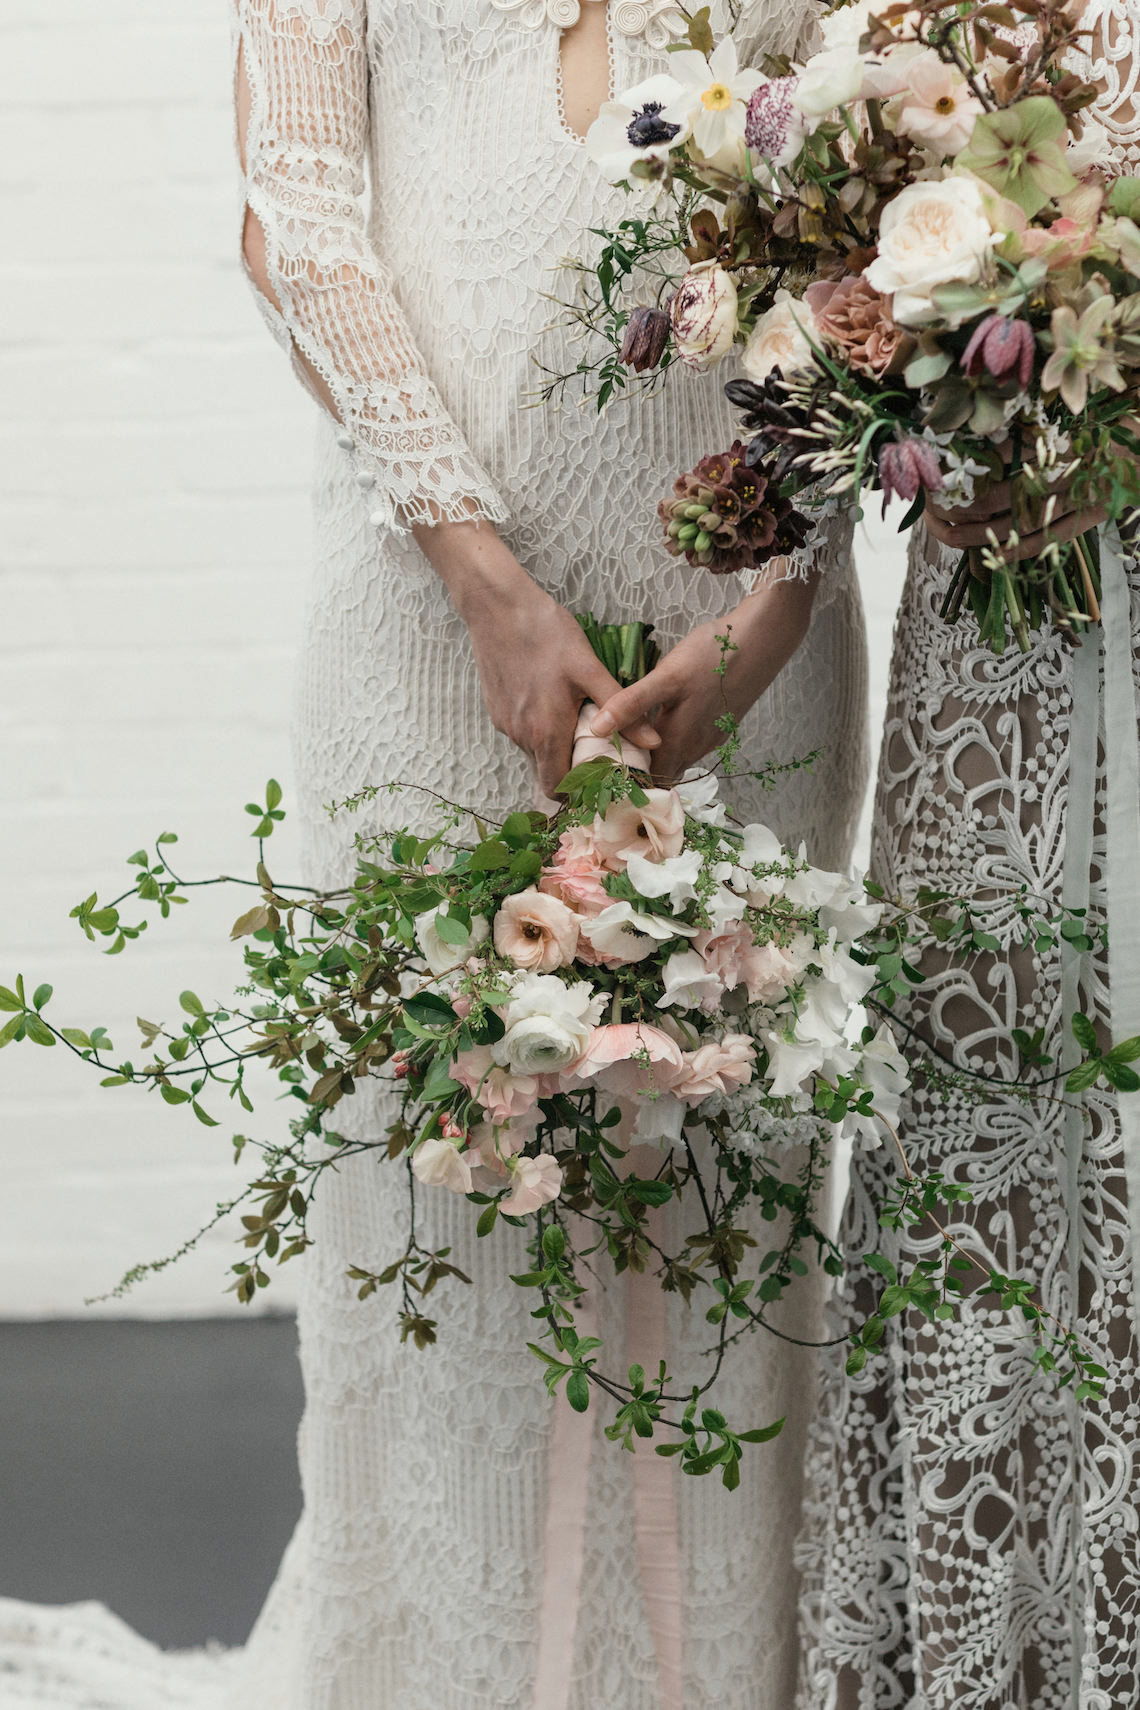 Modern Minimalist Styled Shoot Featuring Gowns For The Natural Bride | Cinzia Bruschini 48